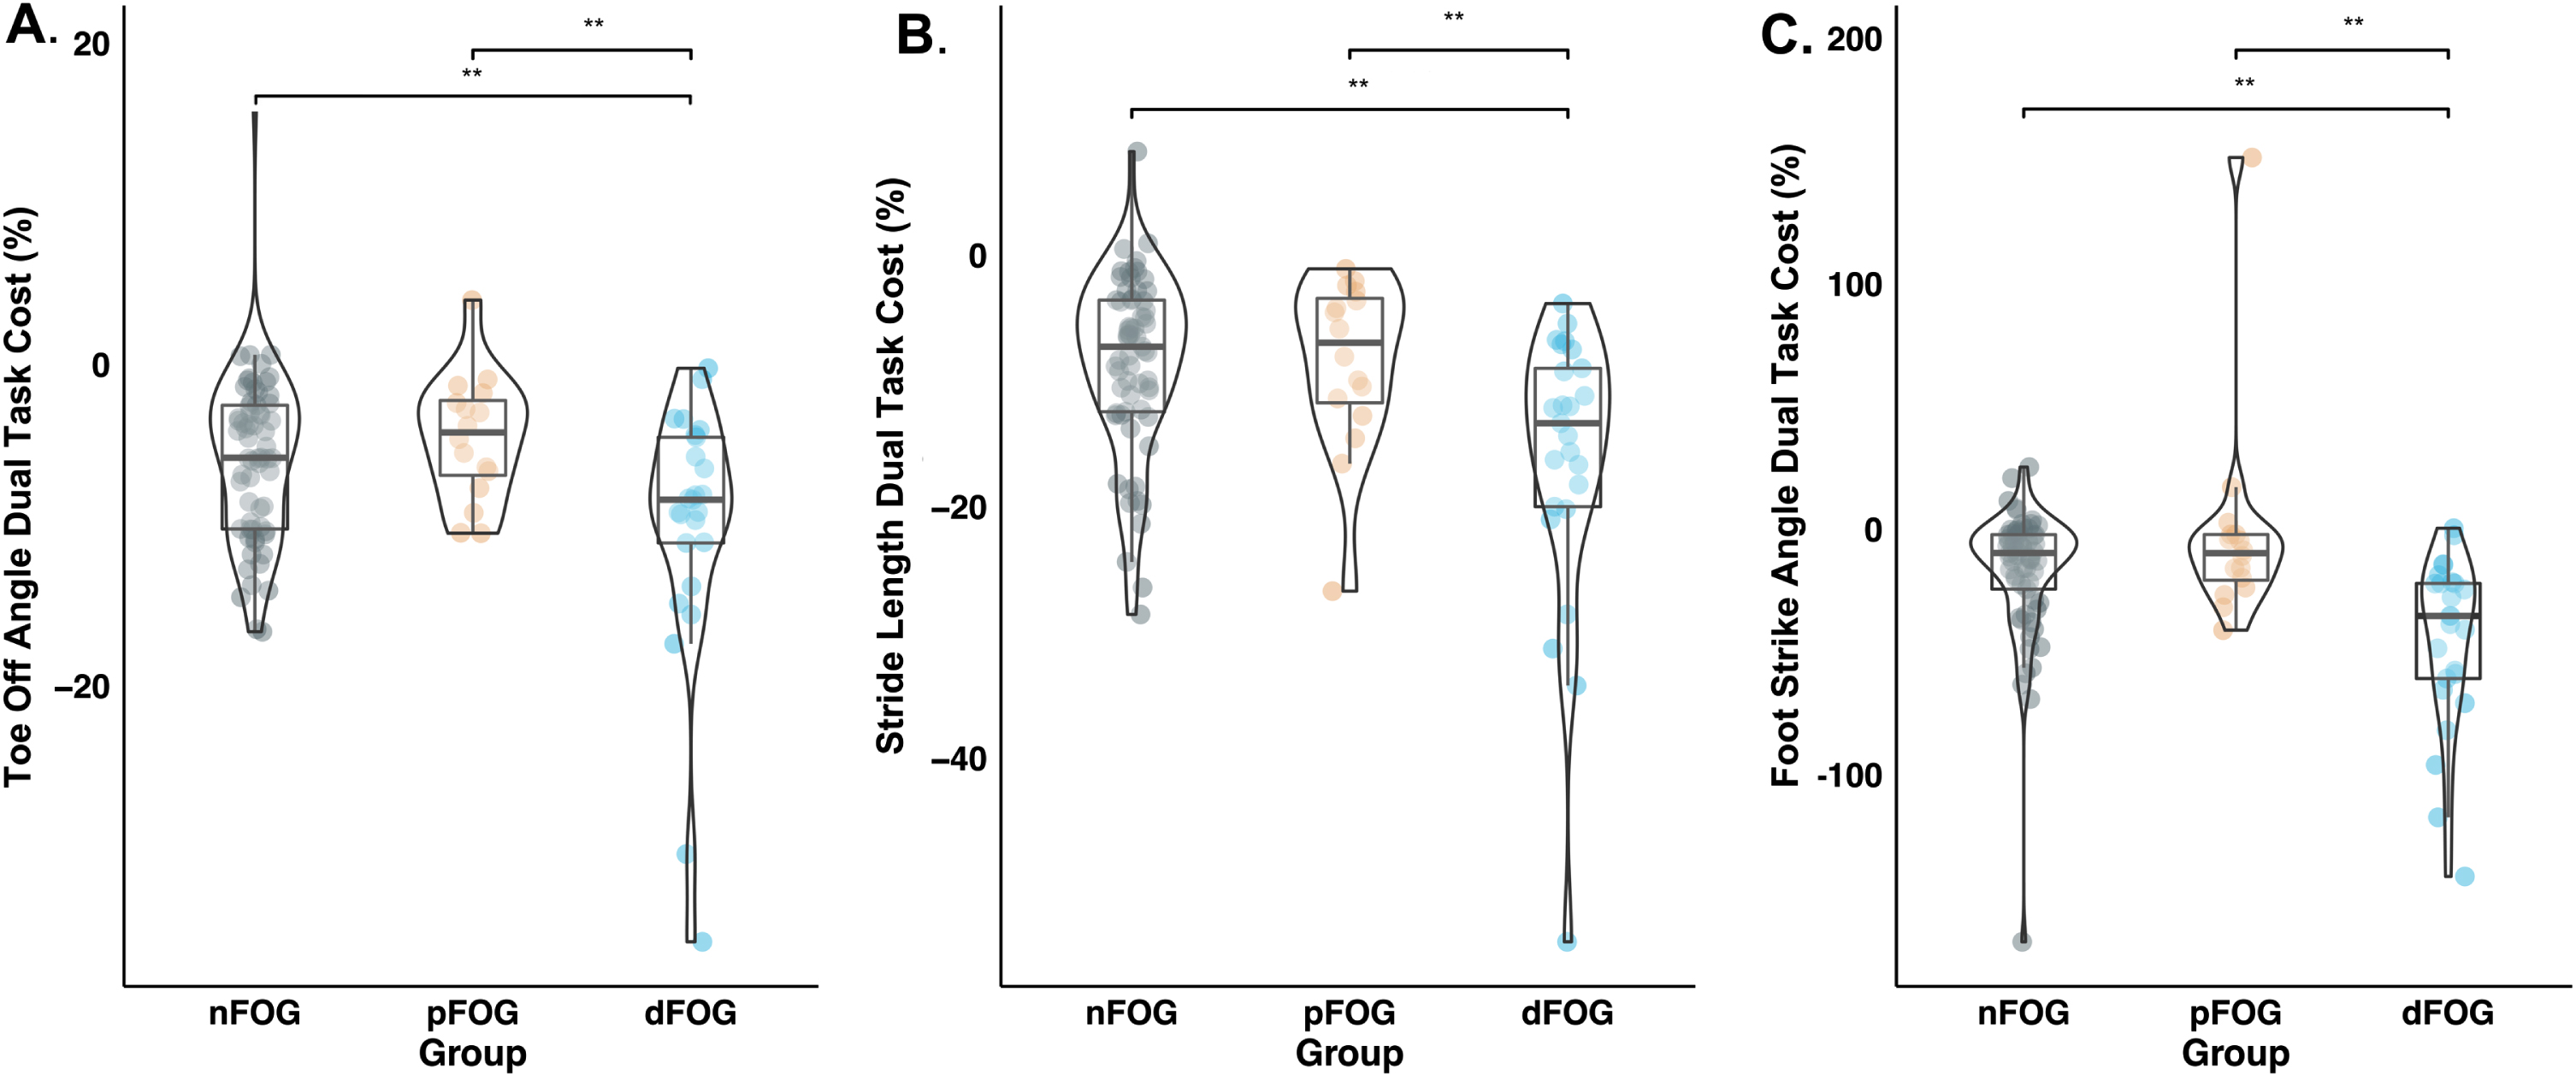 Distribution of dual-task cost (DTC) metrics of A) Toe-Off Angle, B) Stride Length, and C) Foot-Strike Angle across Freezing groups (nFOG-nonfreezers, pFOG-potential freezers, and dFOG-definite freezers). The violin plot shows the distribution of DTC. Boxplot shows the median and interquartile range. Asterisks indicate significant differences in post-hoc paired comparisons (**p<0.01).